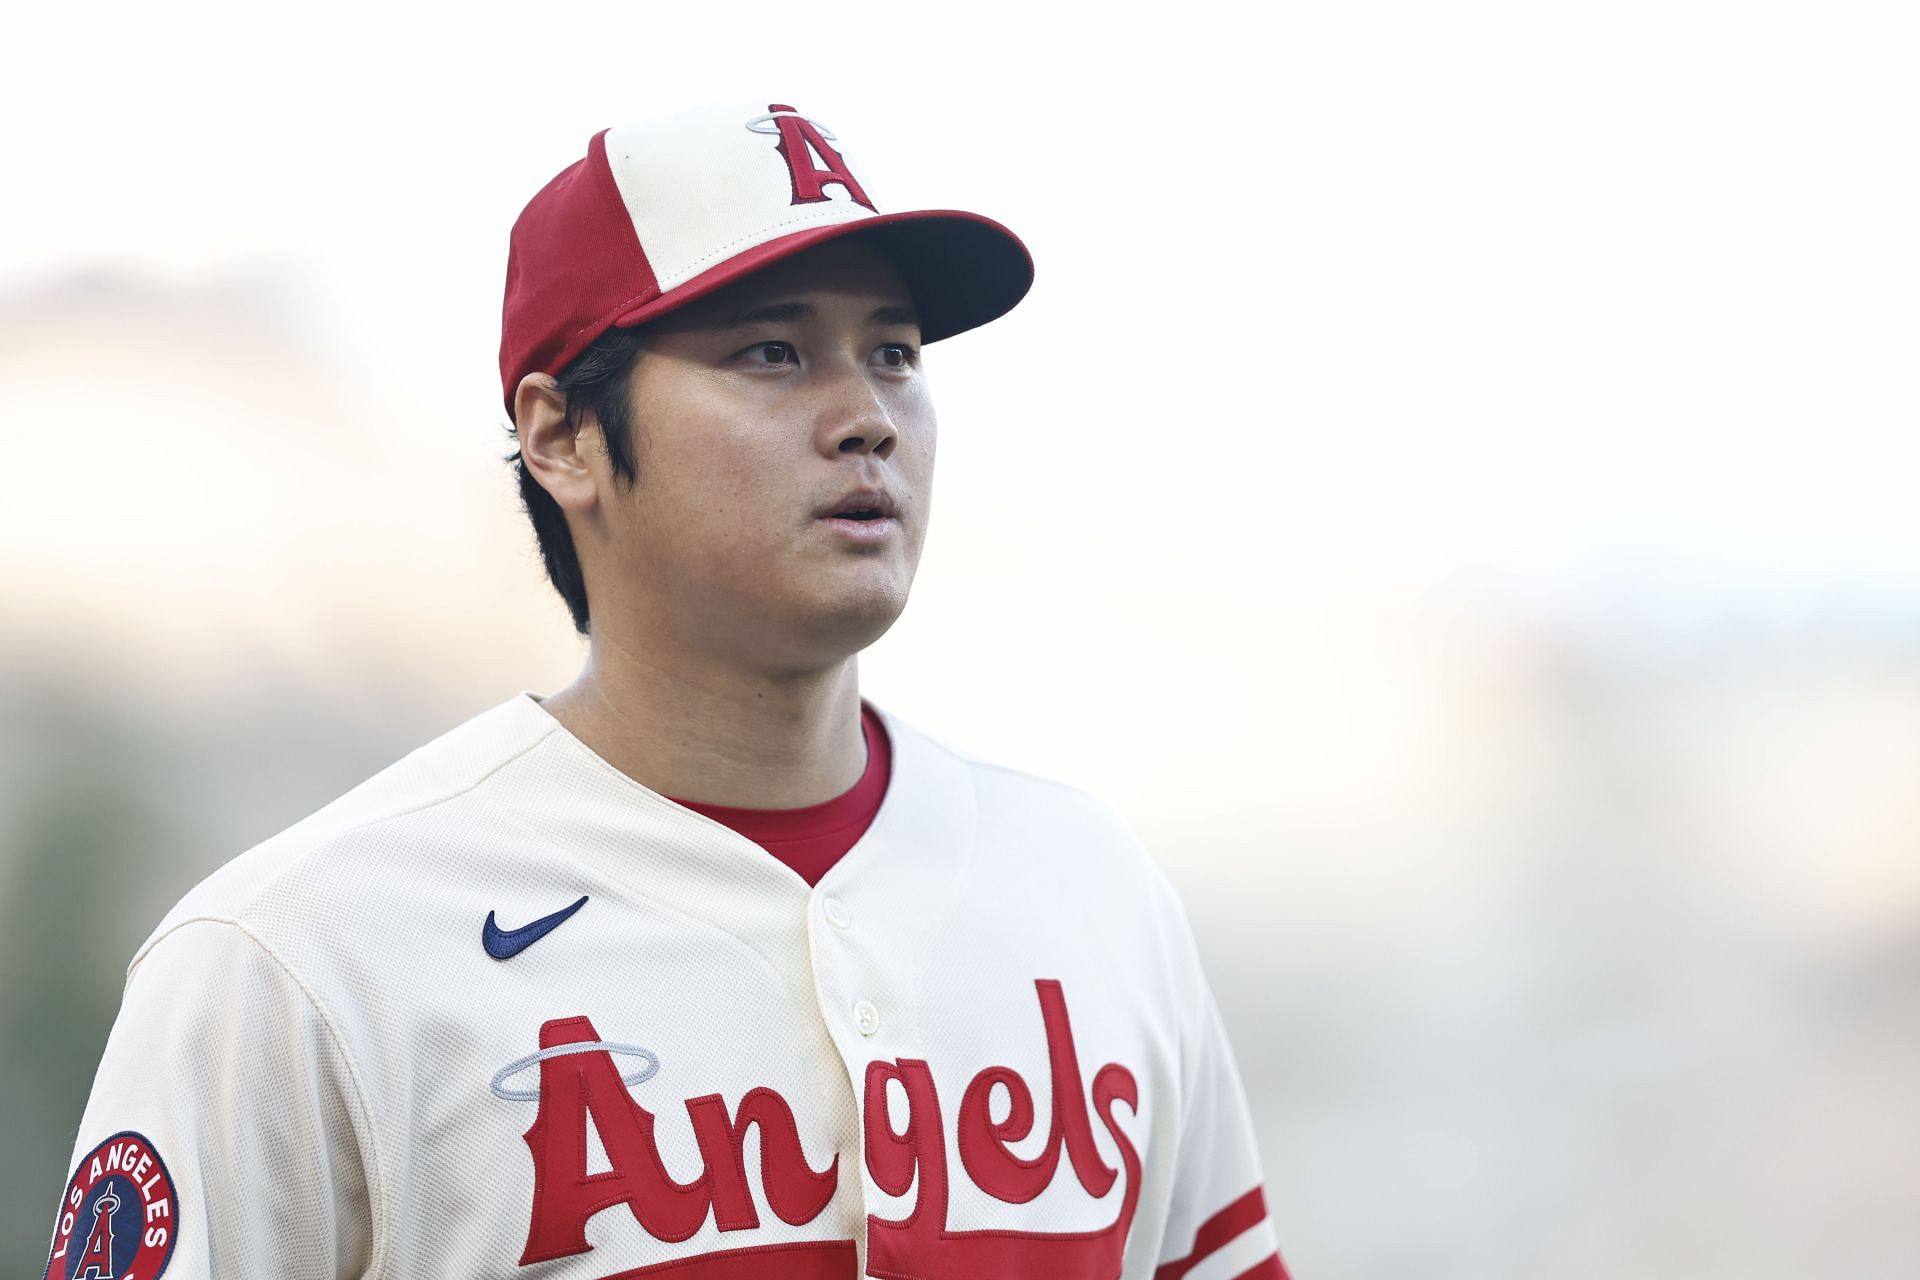 Shohei Ohtani #17 of the Los Angeles Angels looks on prior to a game between the Los Angeles Angels and the Seattle Mariners at Angel Stadium of Anaheim